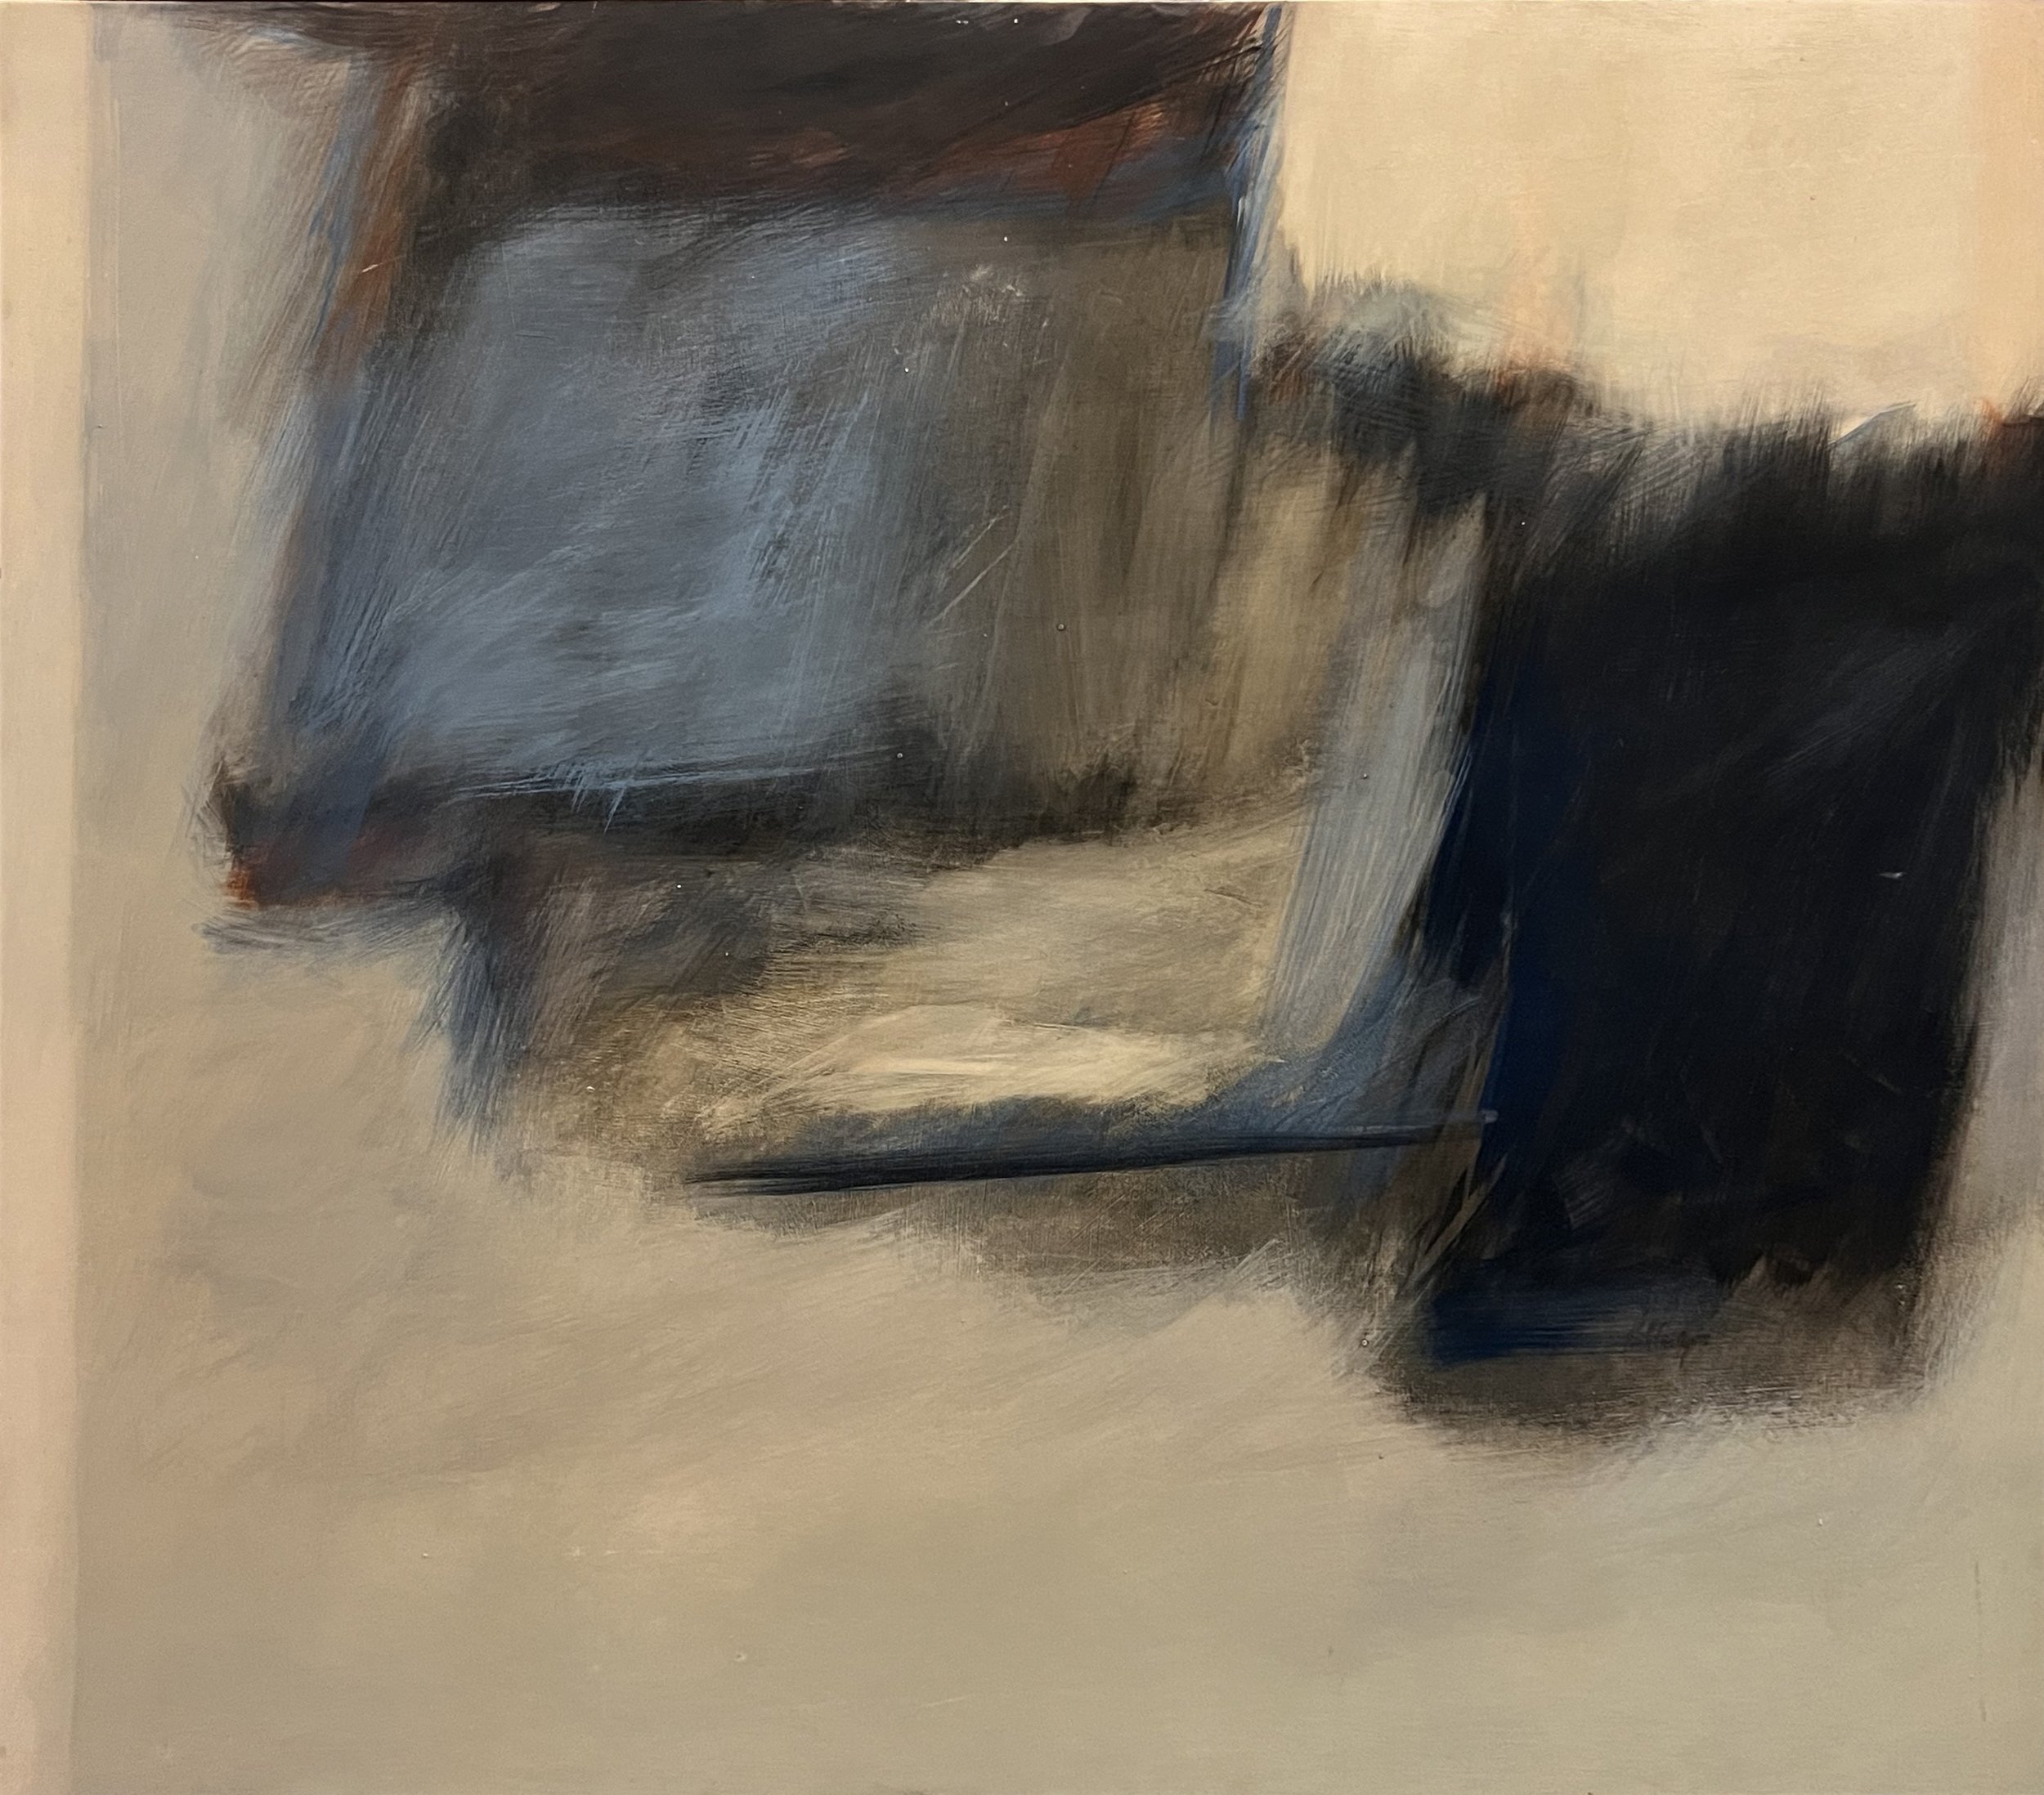 Transitive, 1959, oil on masonite. Gift of Patricia Cade, BRAHM Permanent Collection, 2015.05.02.